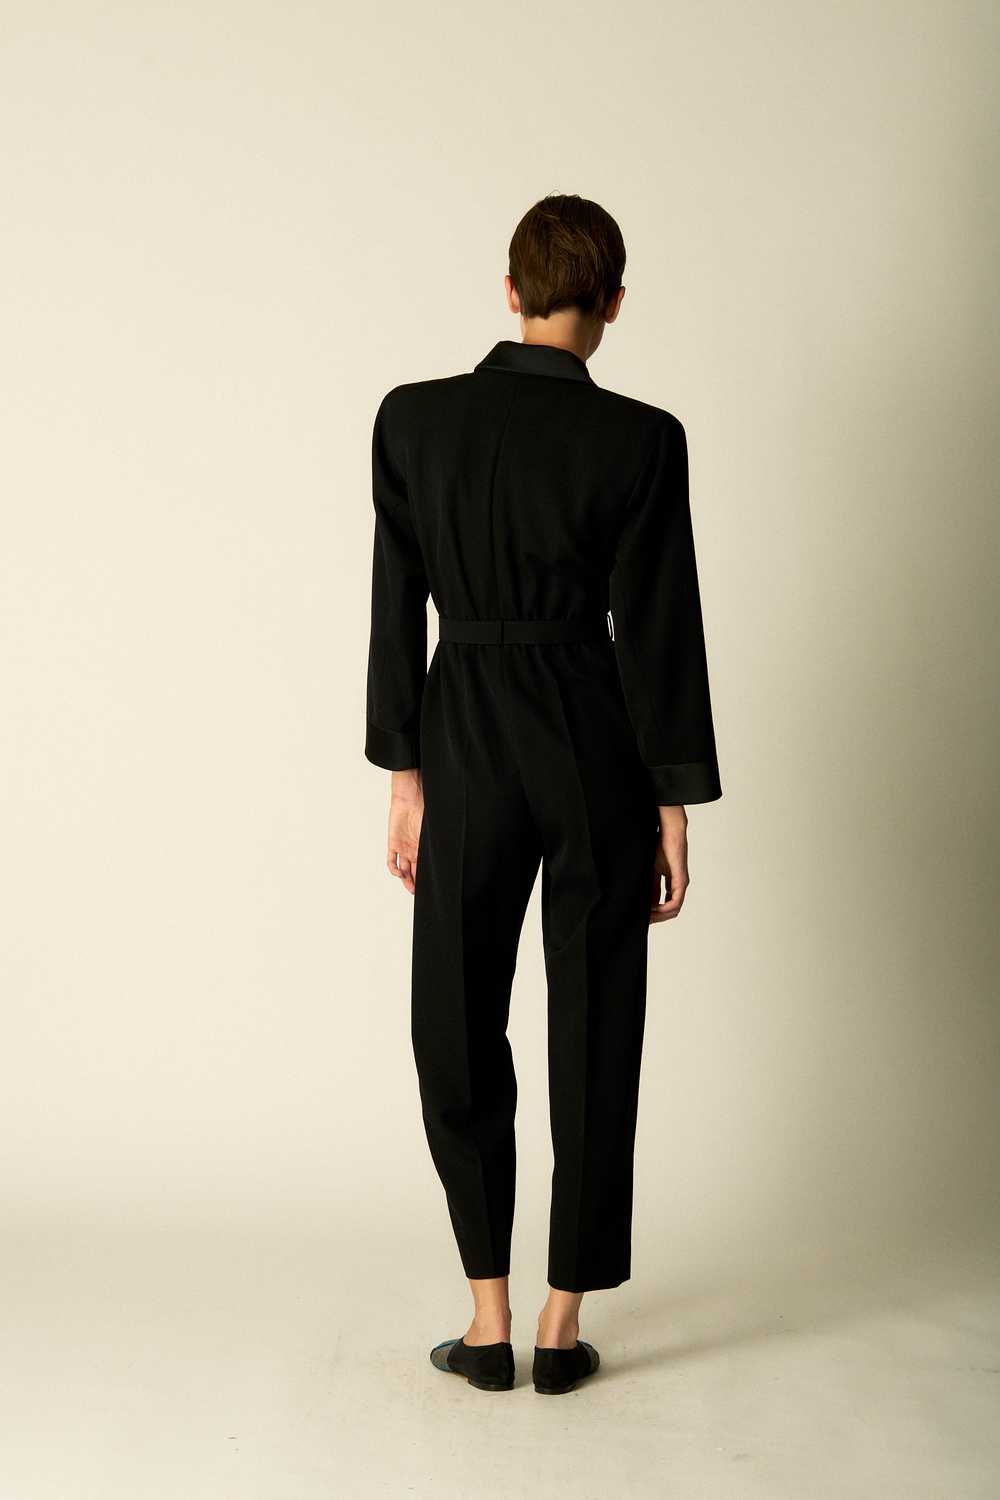 YSL Couture Jumpsuit - image 3